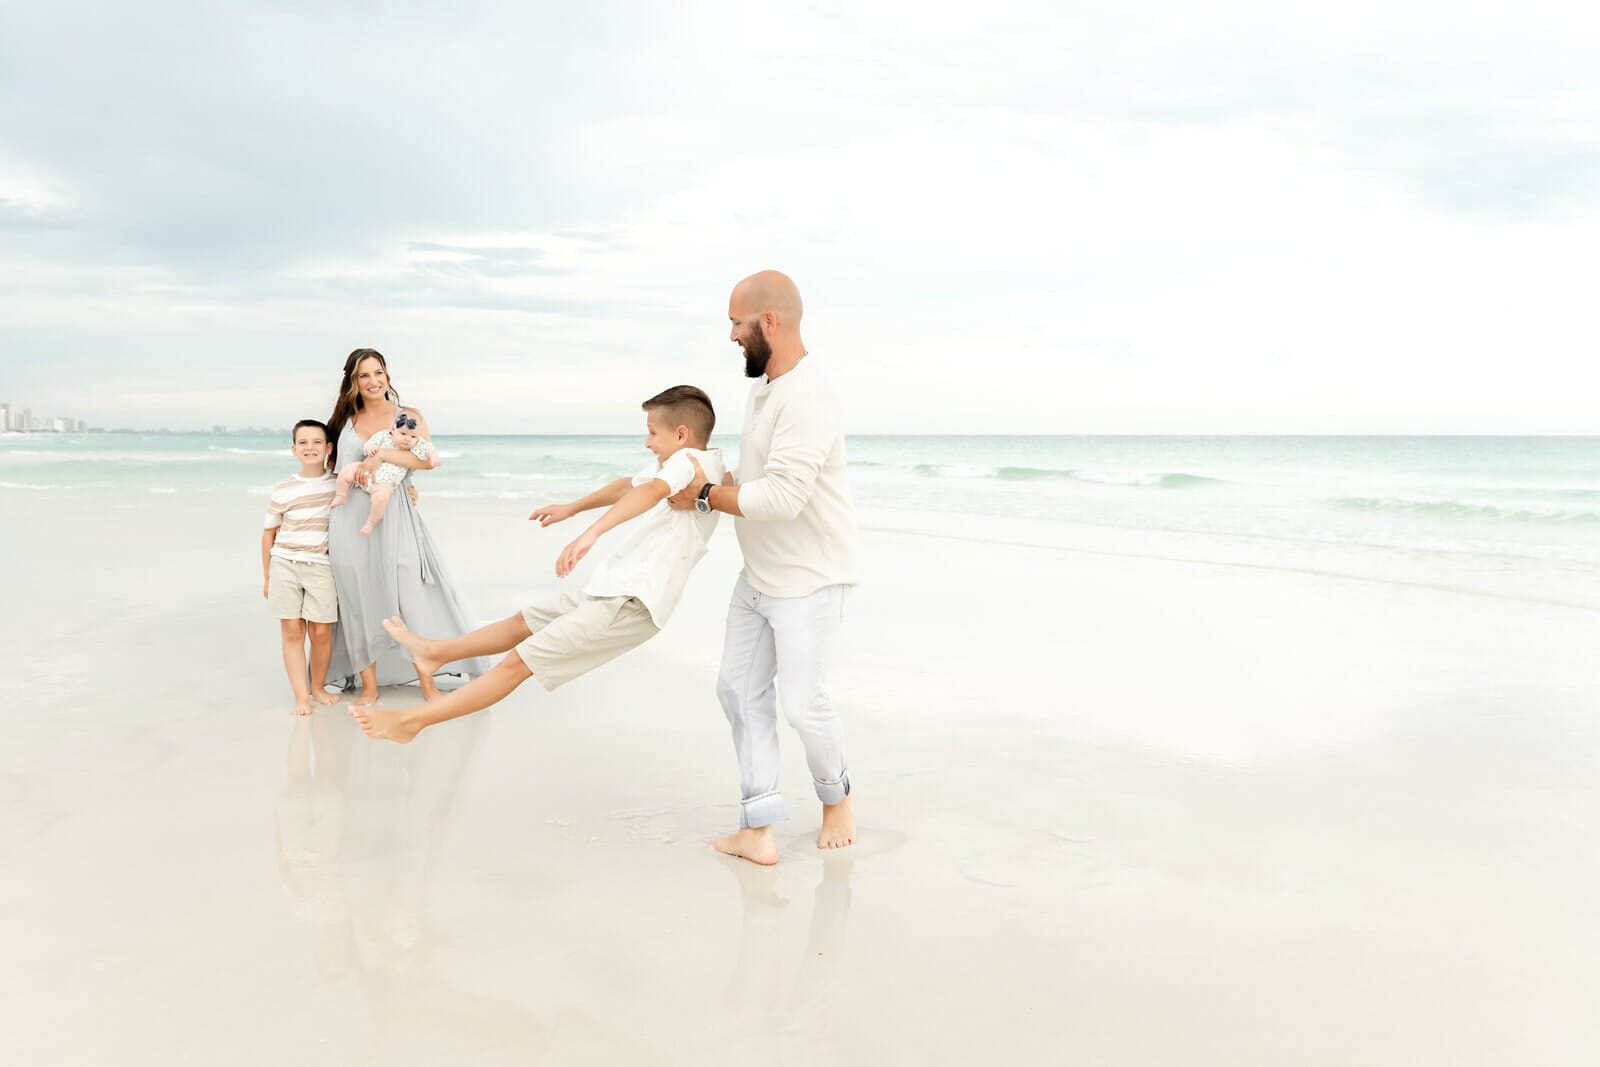 A family is playing on the beach with their children Destin Holiday Isle.